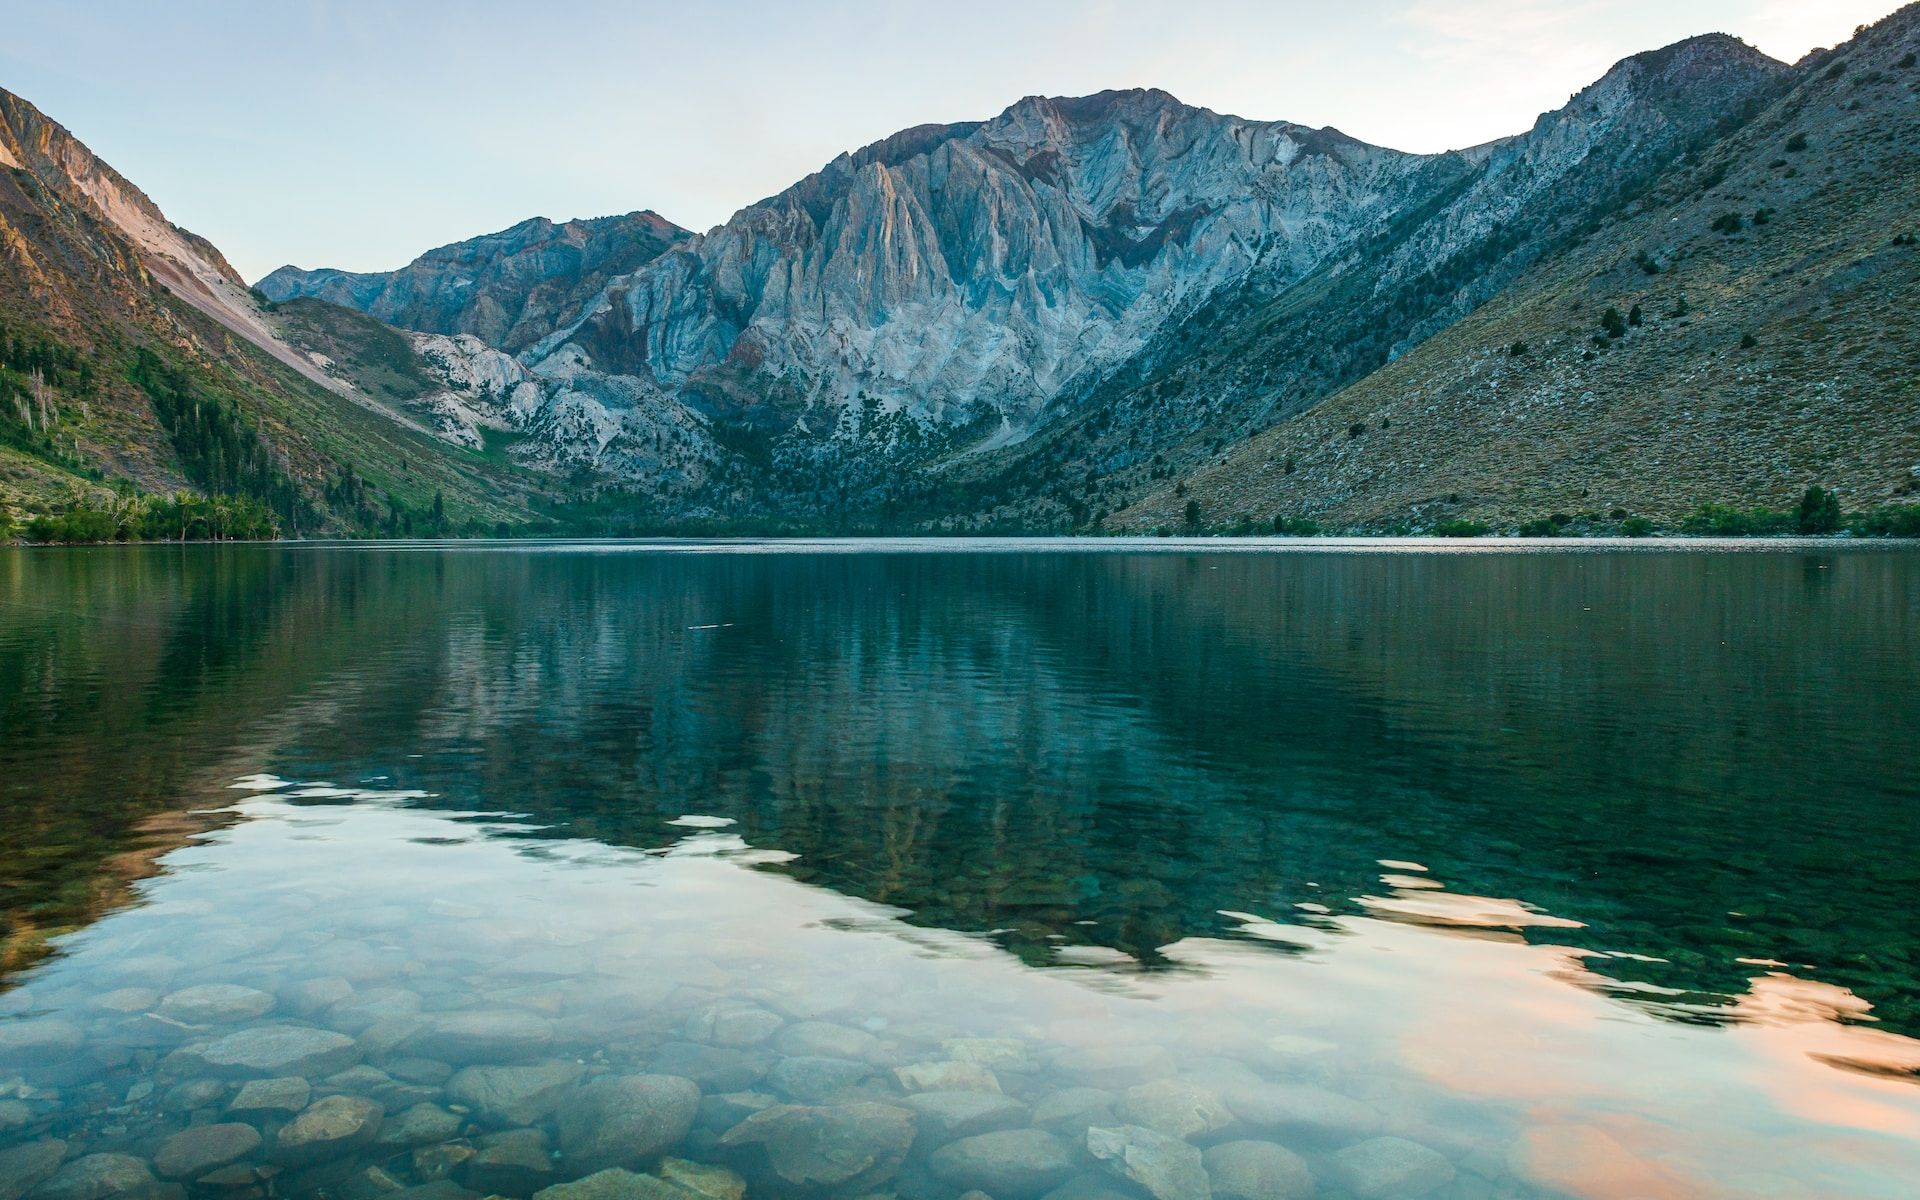 The clear waters of Convict Lake with mountains in the background